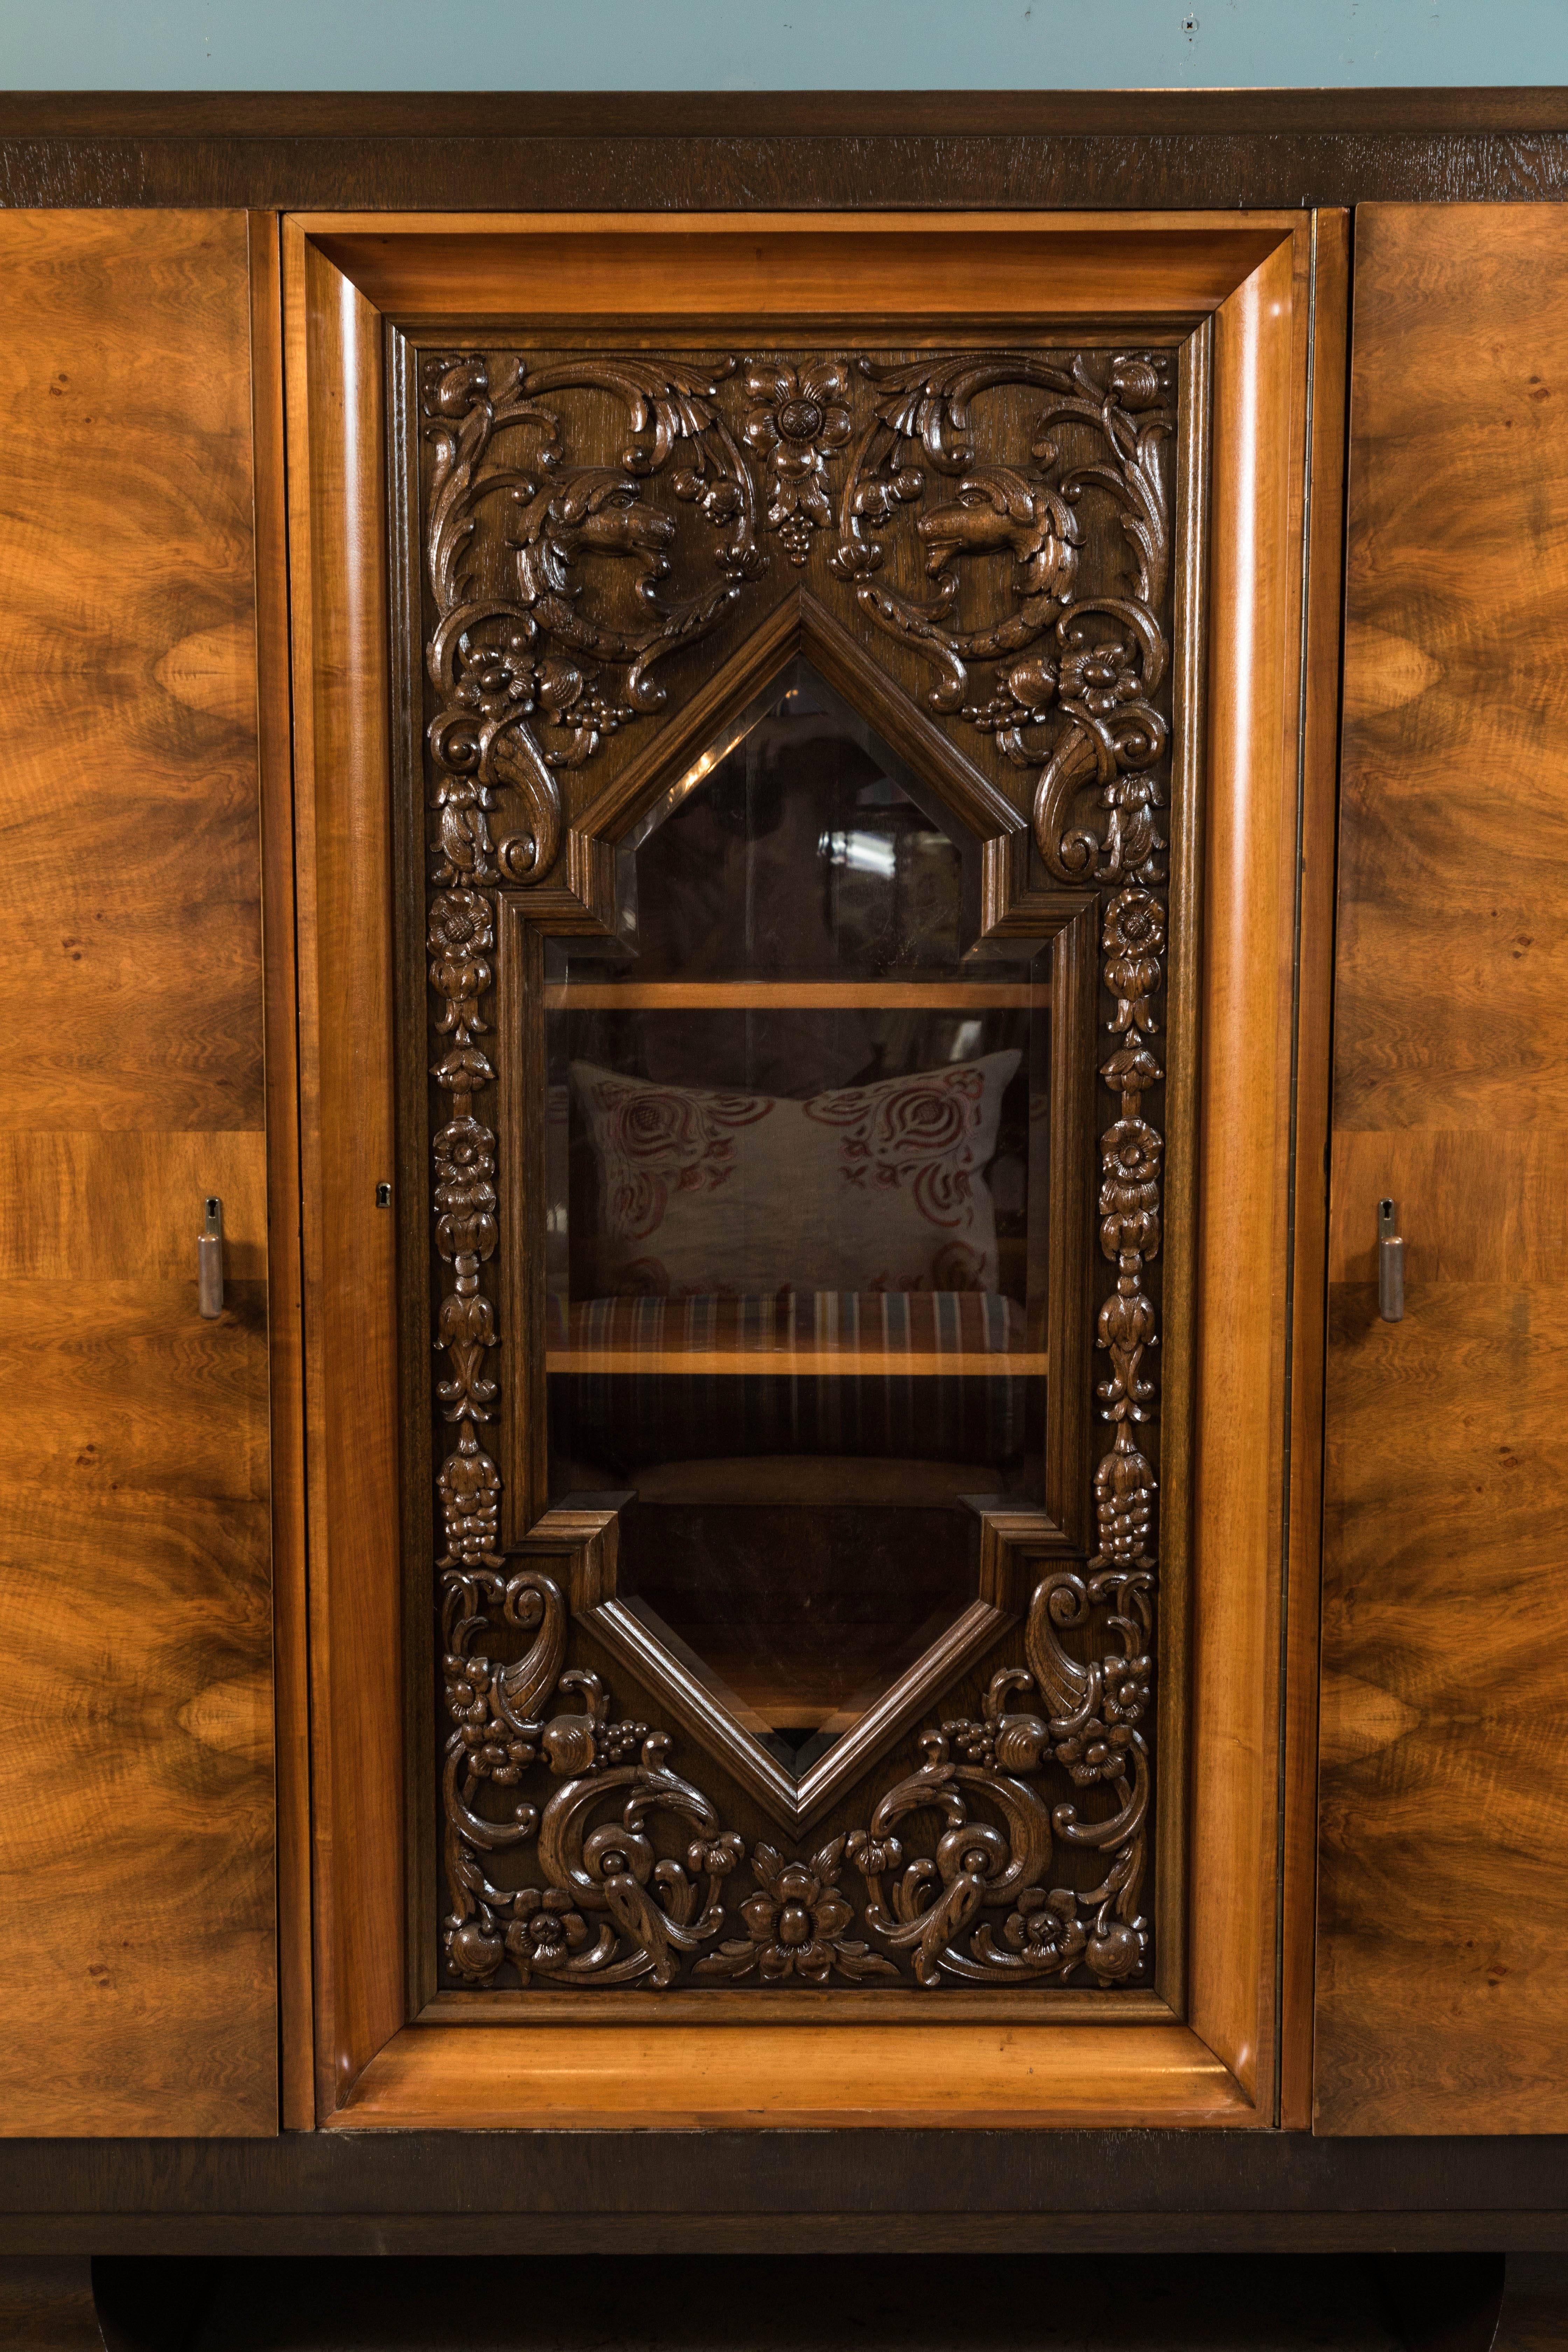 1930s-1940s walnut and oak three-door armoire. Centre door has a cut out centre with bevelled glass and ornate carved detail. All three sections have storage shelves inside. This piece has been completely stripped and newly refinished. Made in